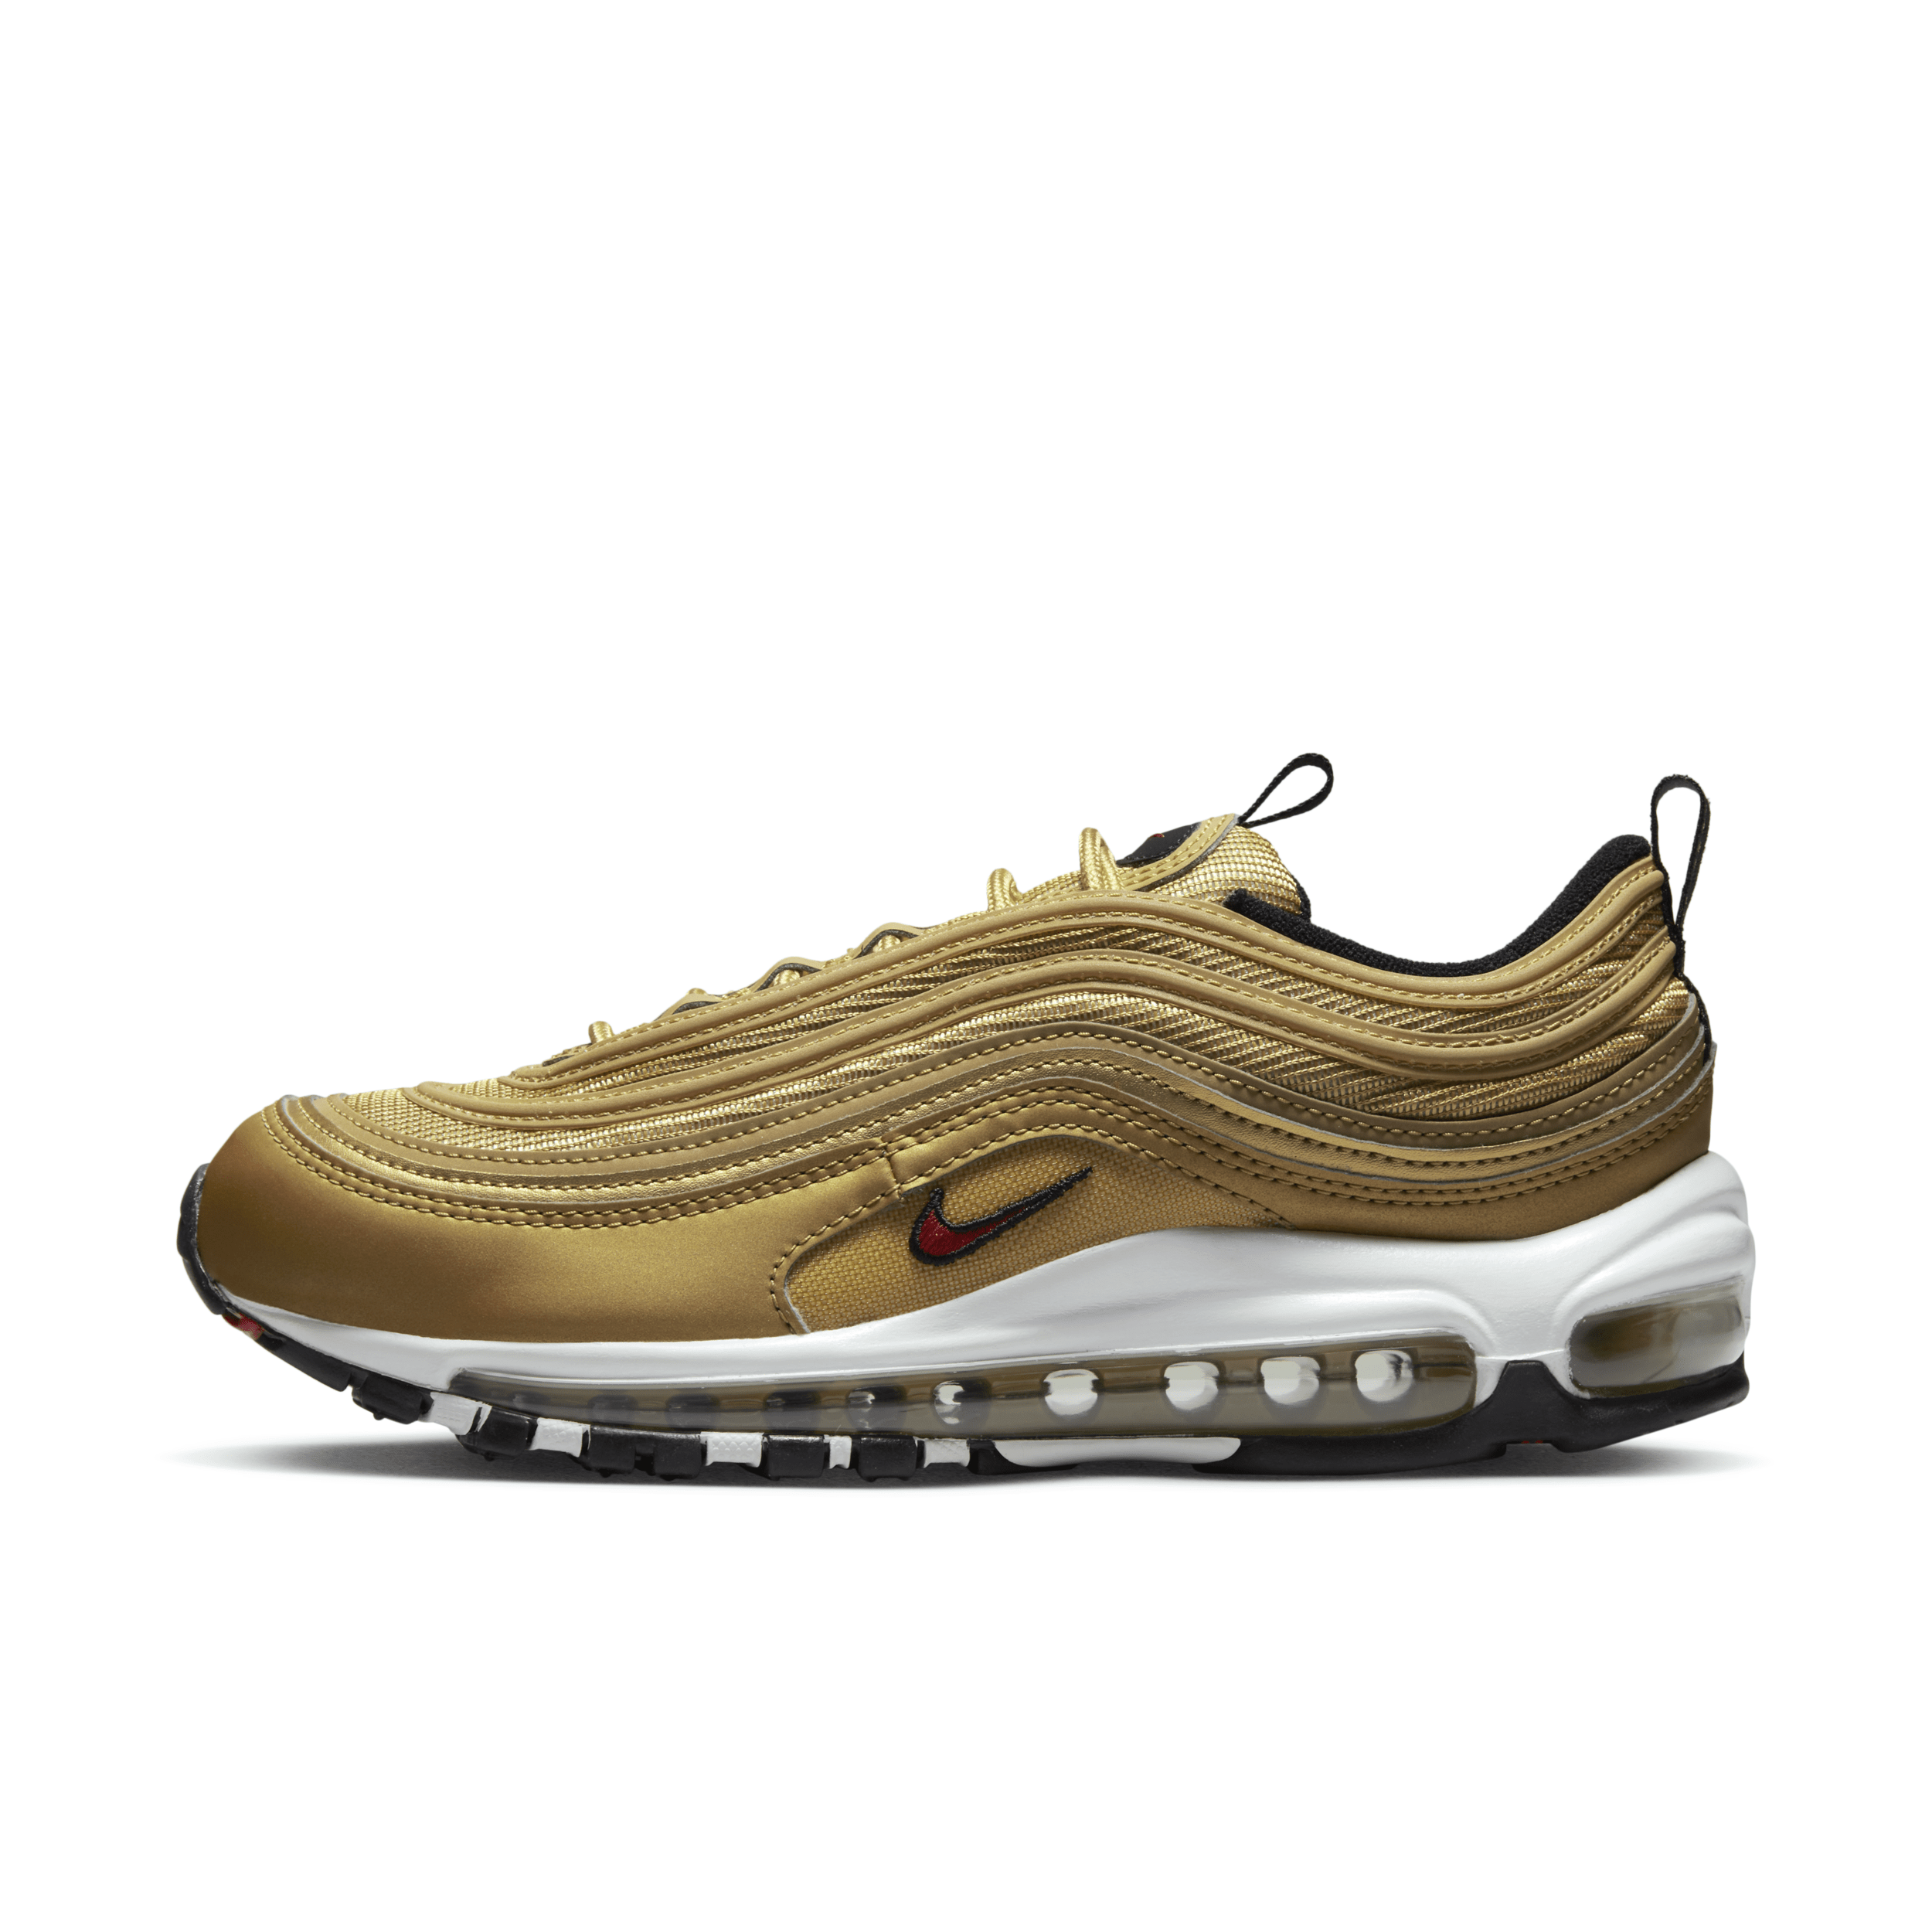 Nike Women's Air Max 97 Shoes in Brown, Size: 7 | DQ9131-700